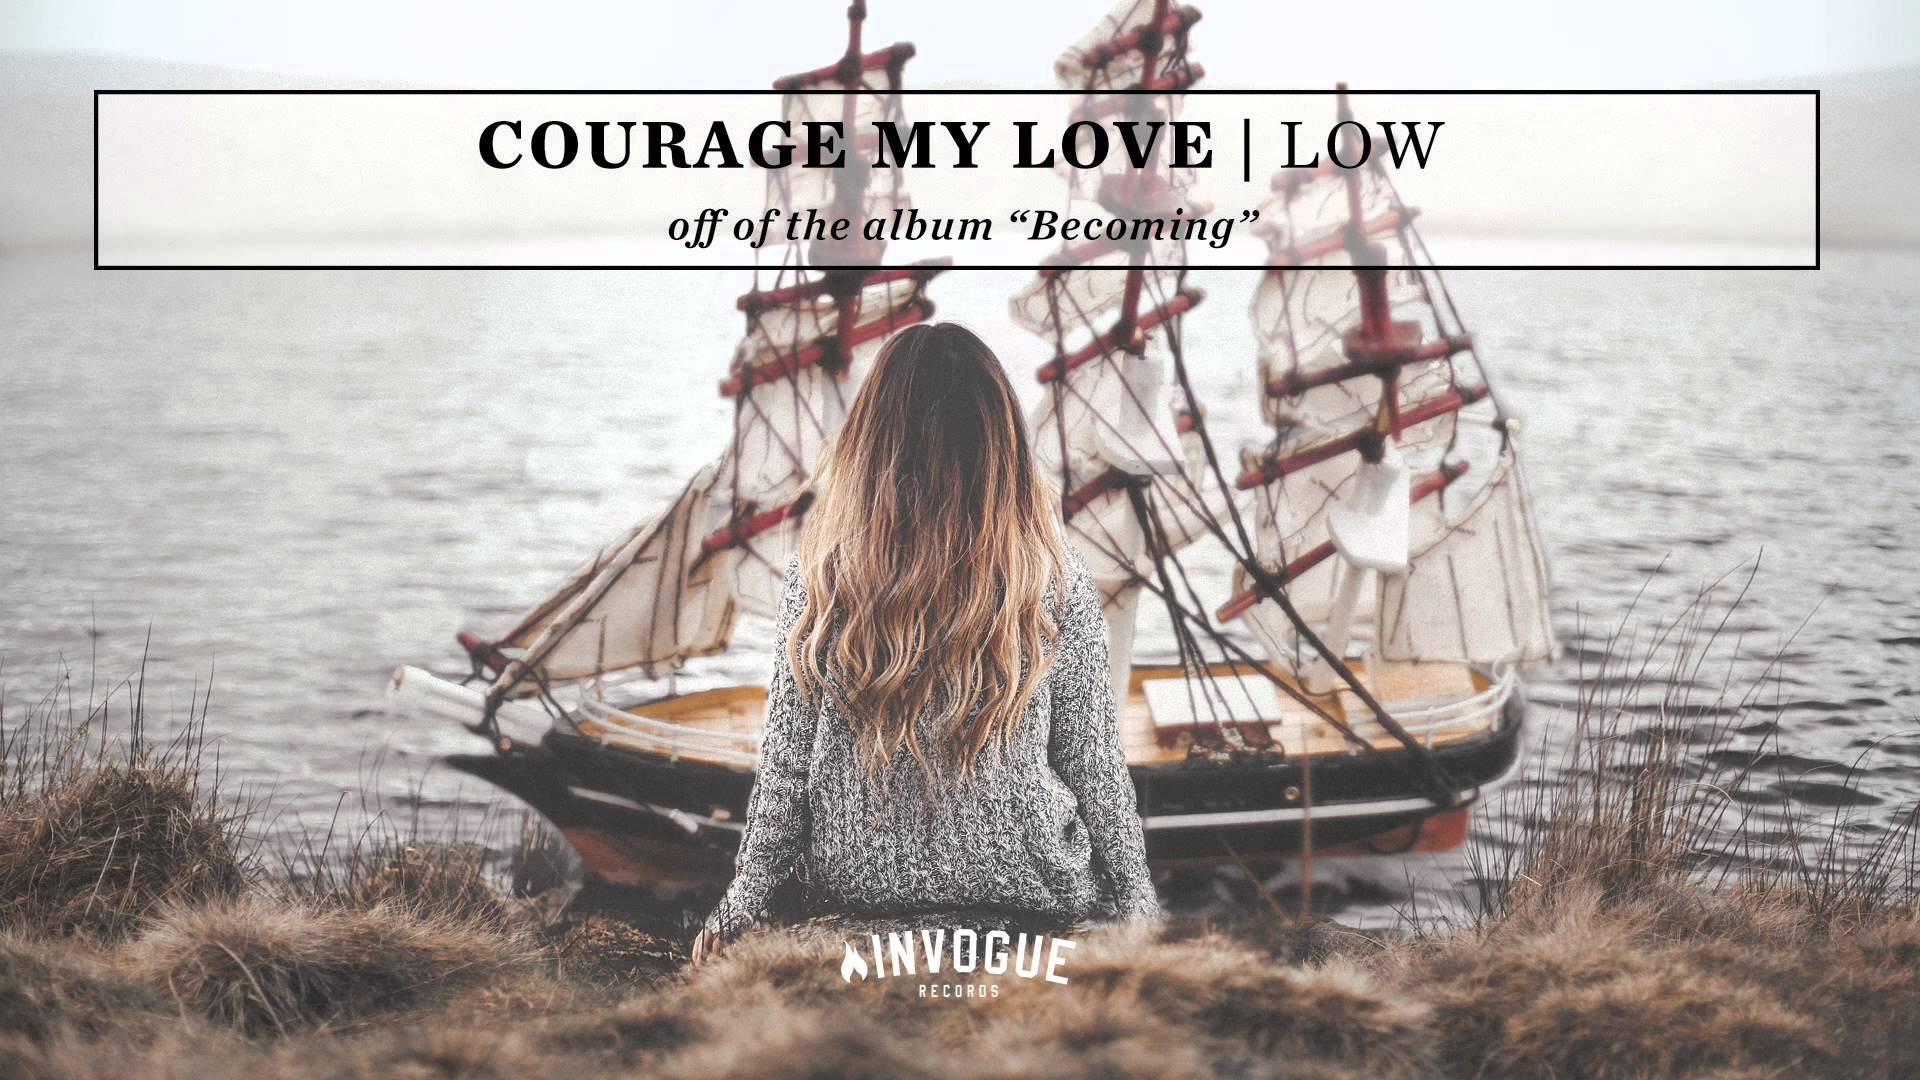 Courage My Love